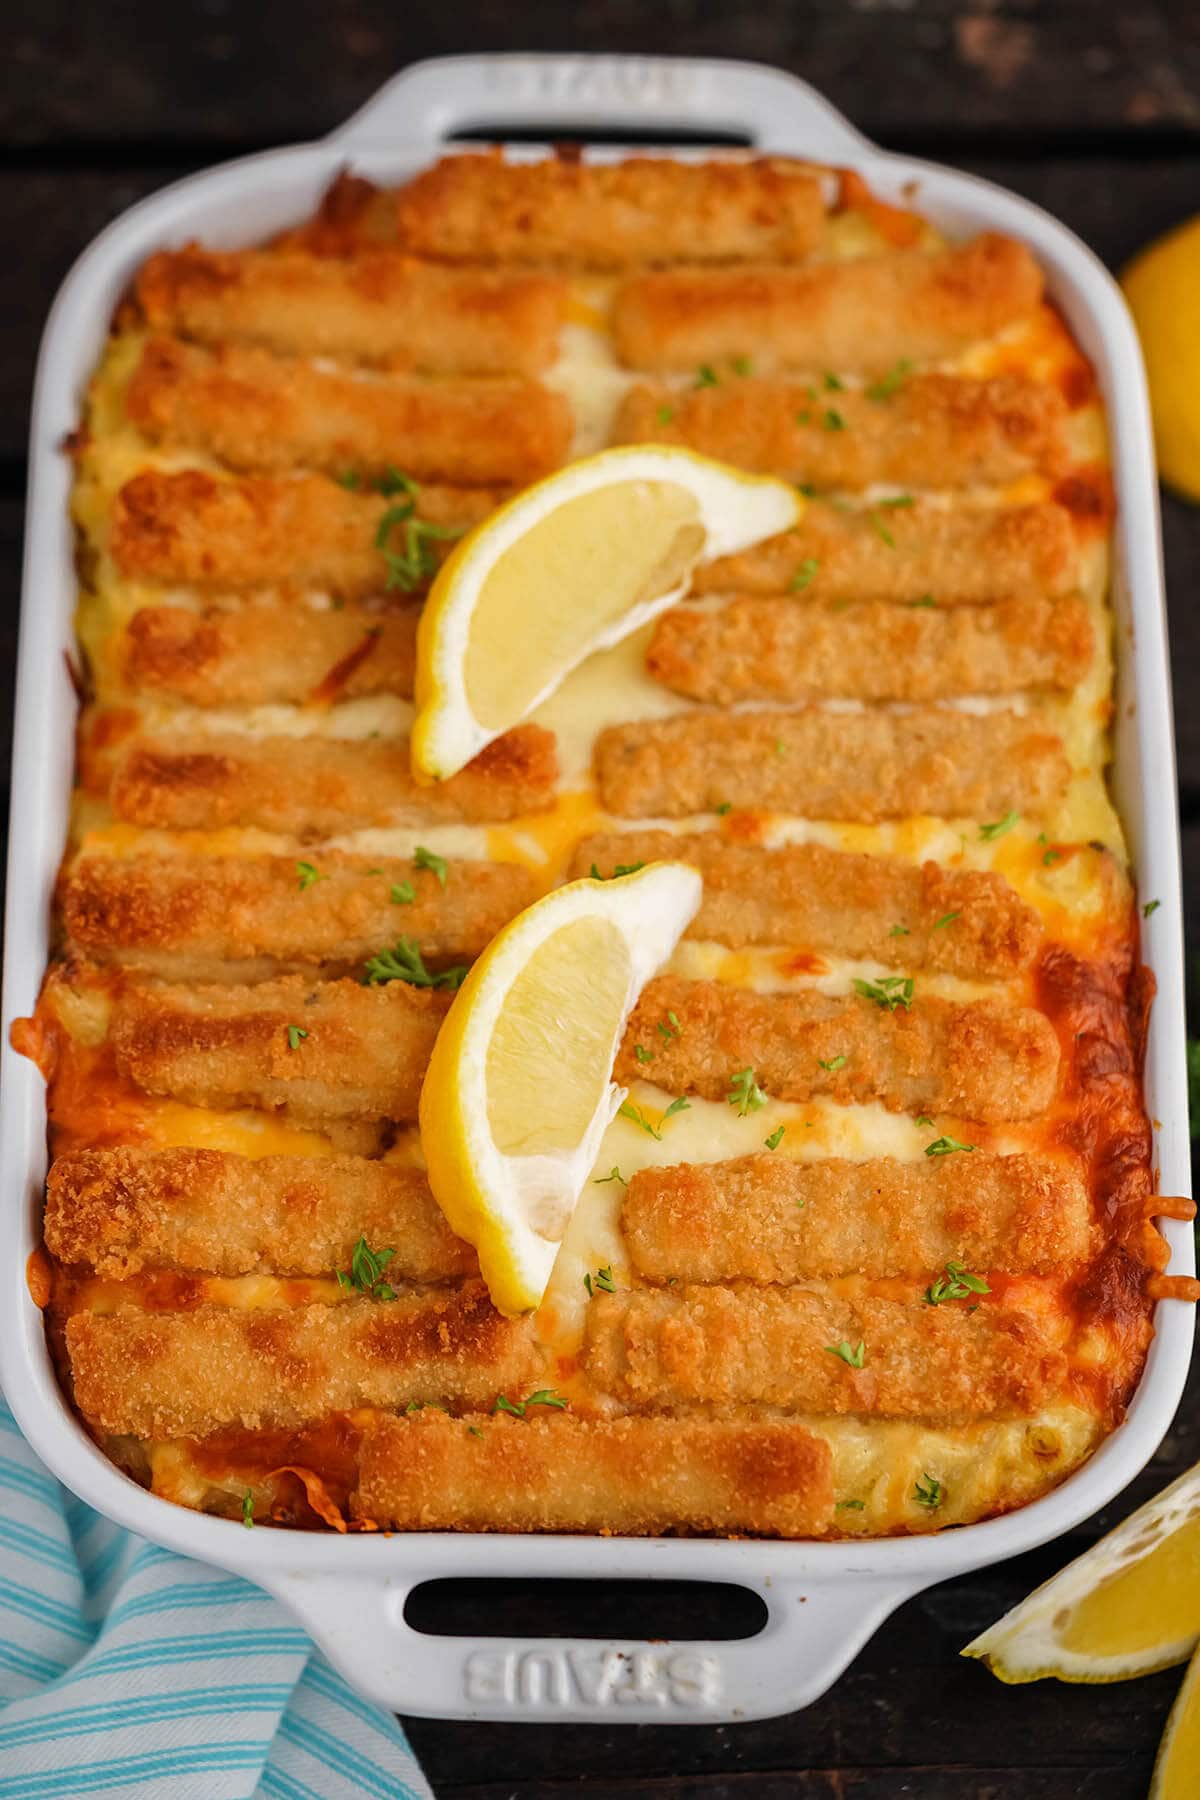 Baked cheesy casserole topped with lemon slices.